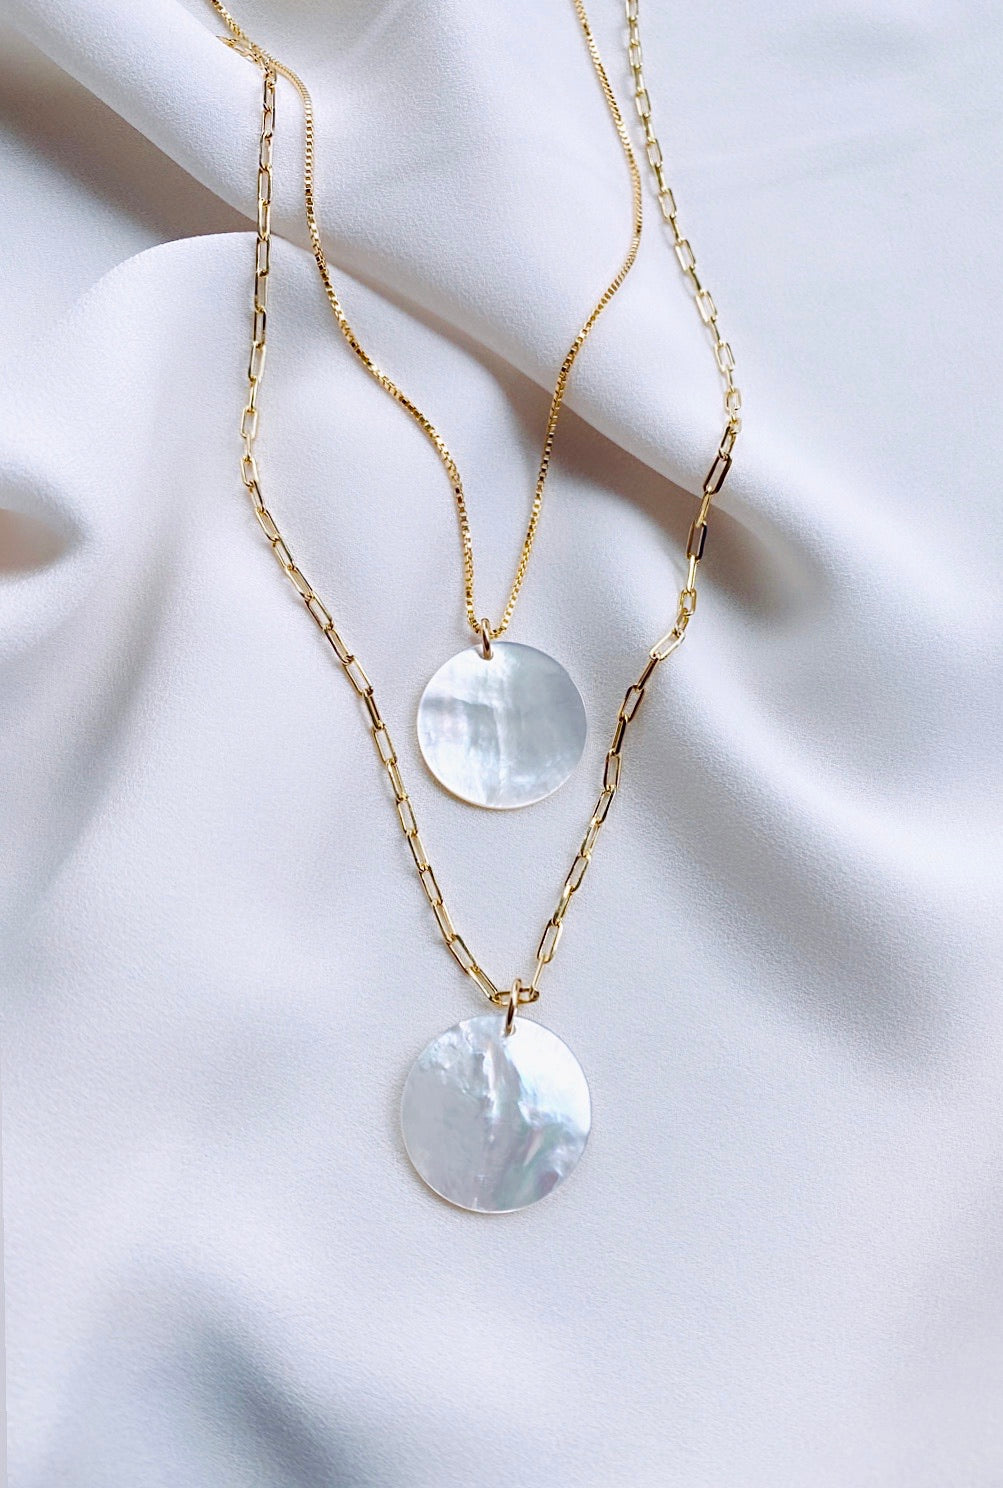 Mother of Pearl Coin Medallion Necklace - Gold Filled